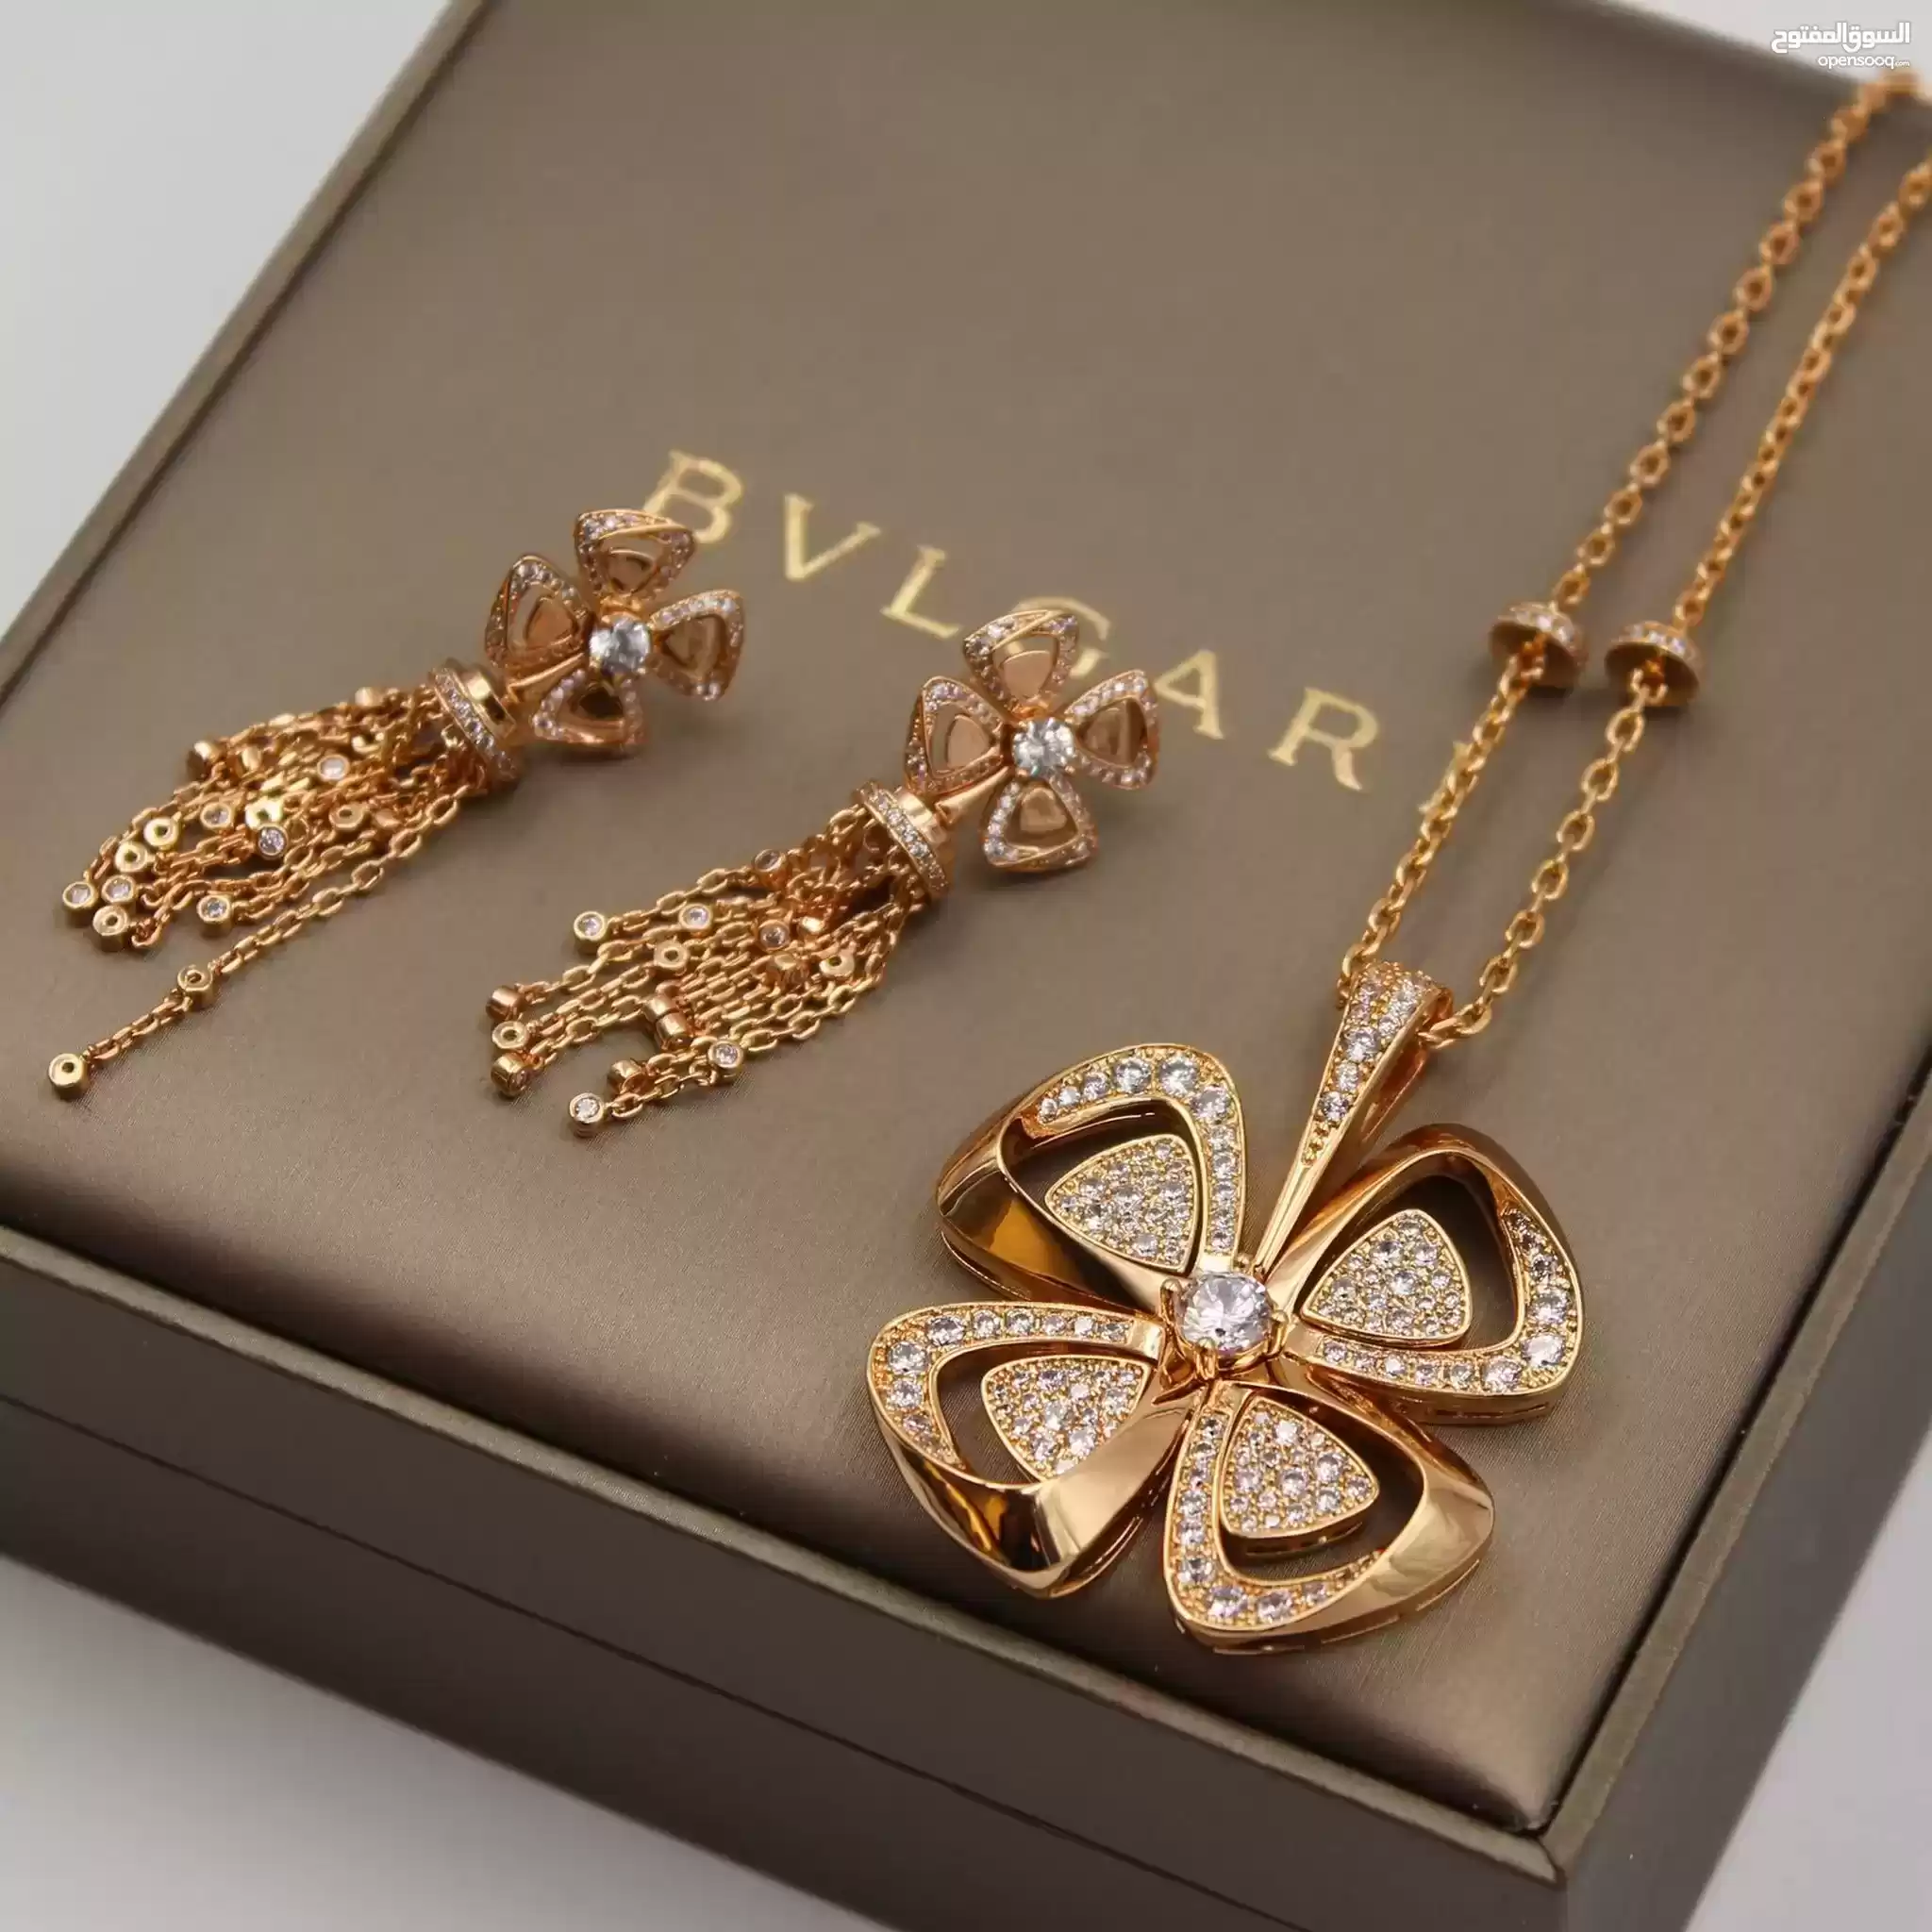 BVLGARI* Set Long Necklace with Earrings #*Master Quality-pic_1